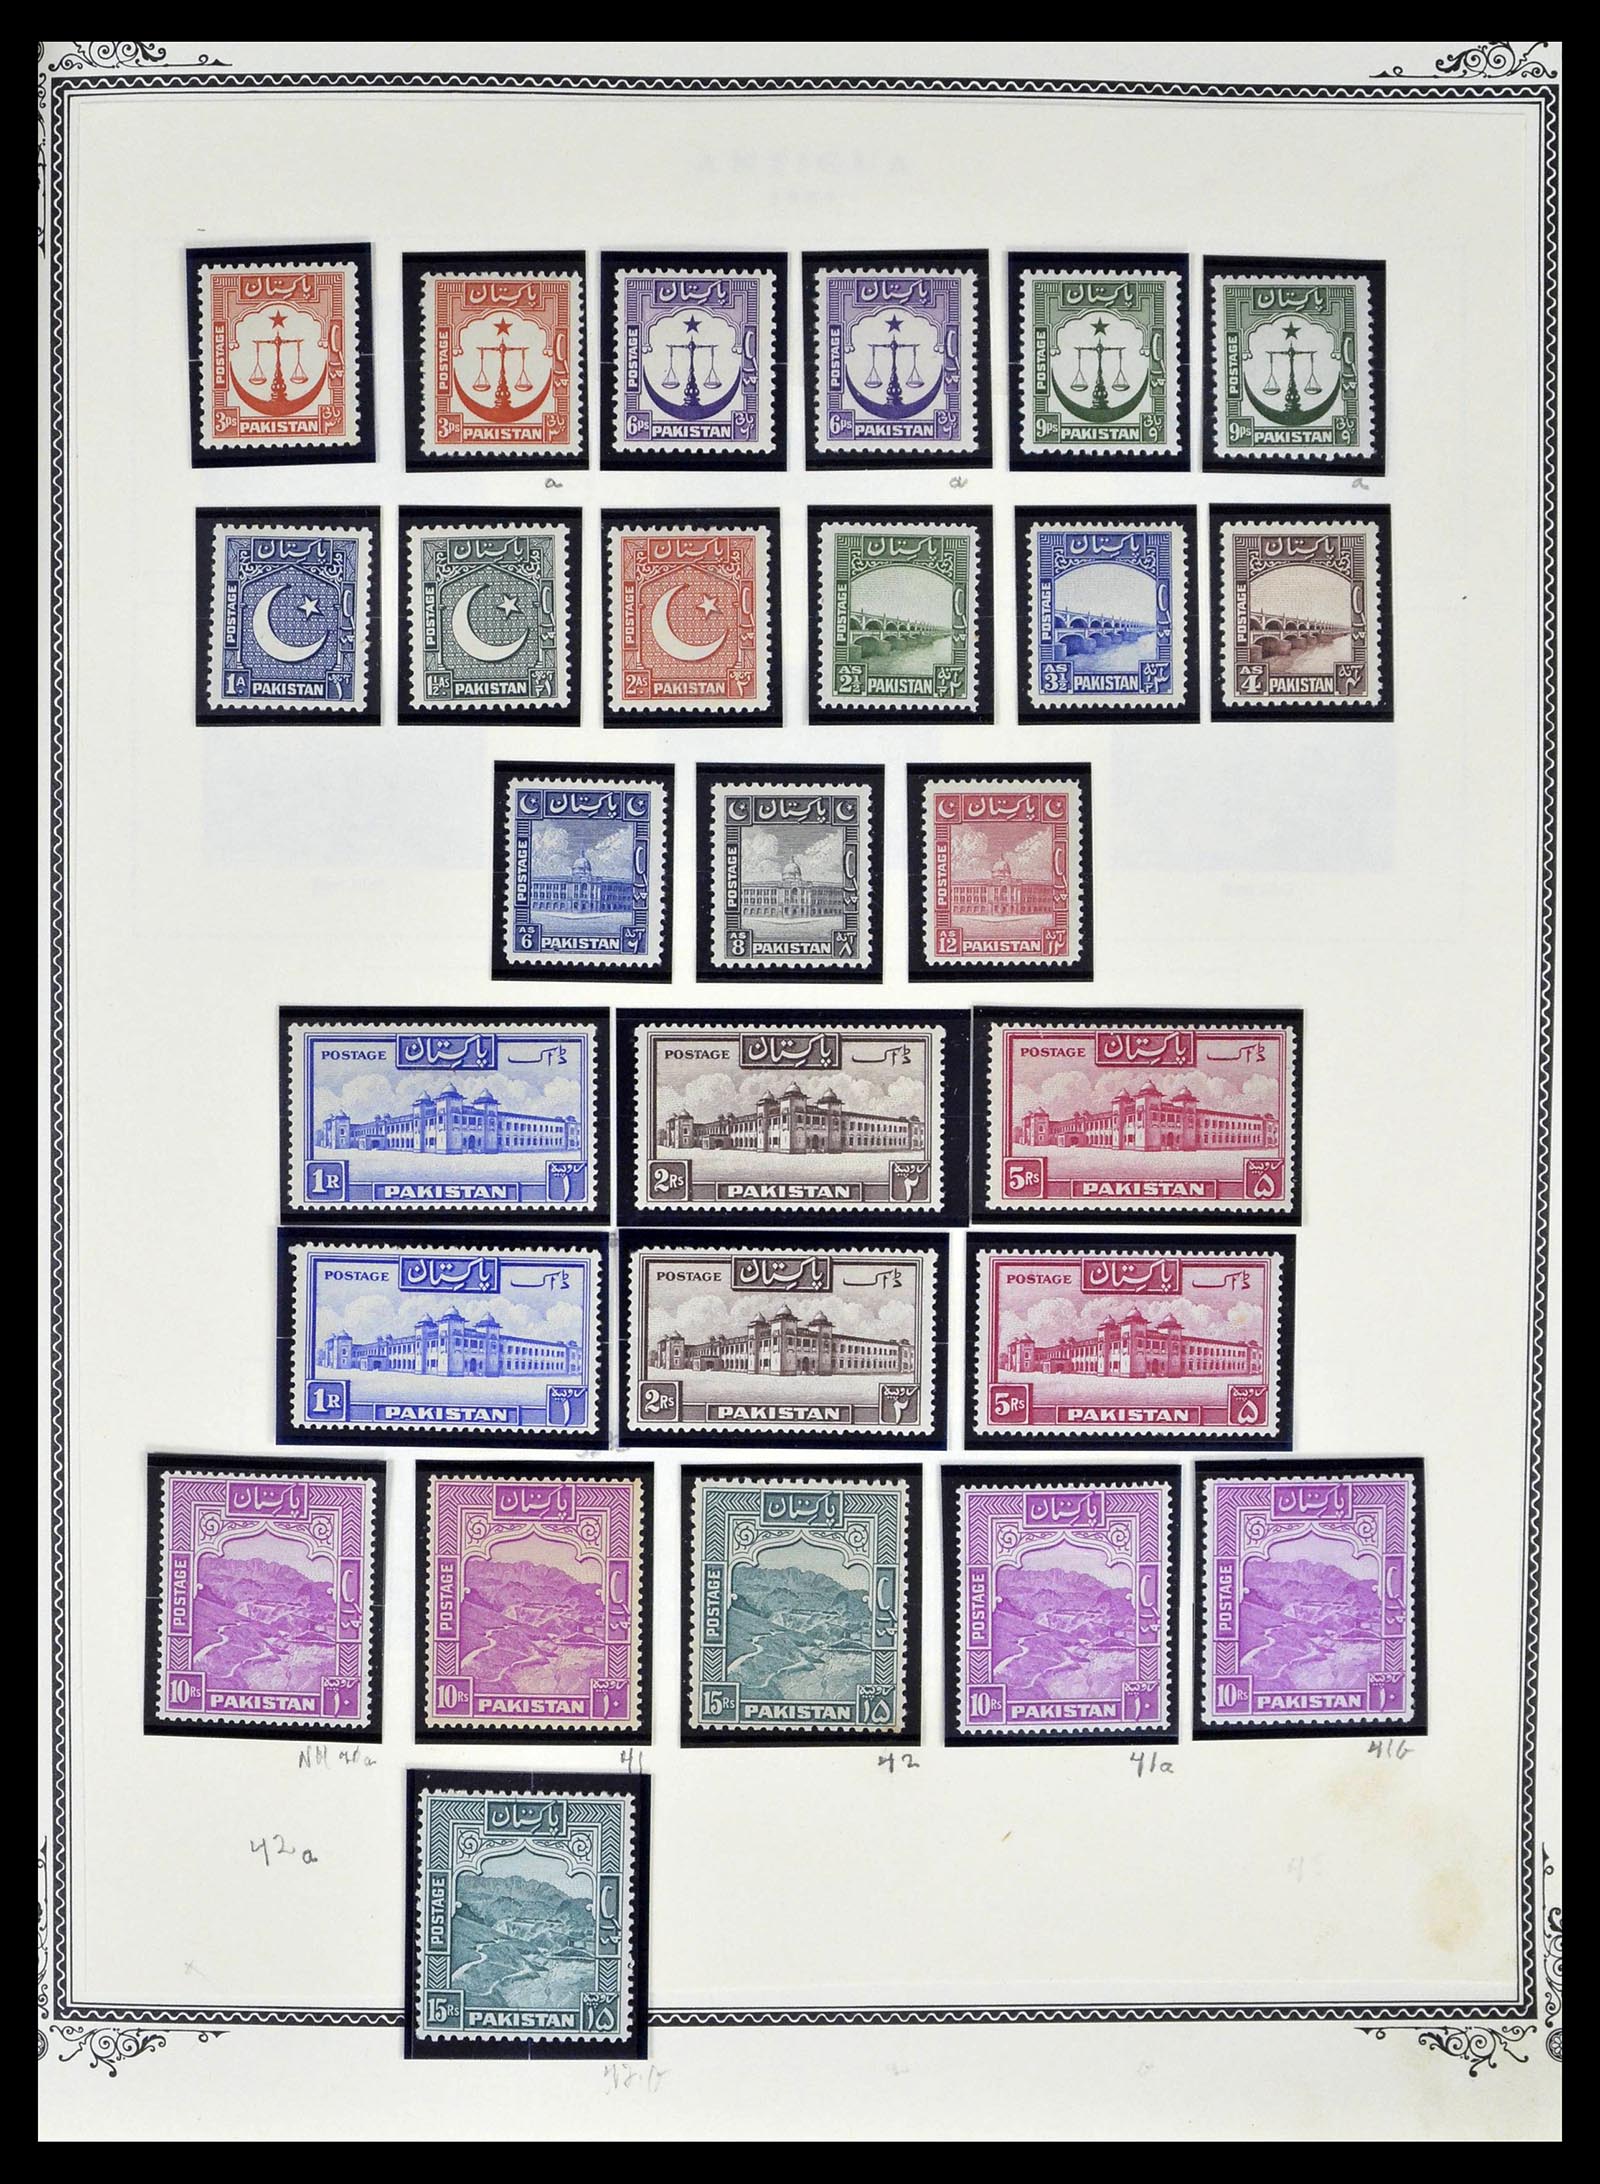 39177 0004 - Stamp collection 39177 Pakistan 1947-1980.